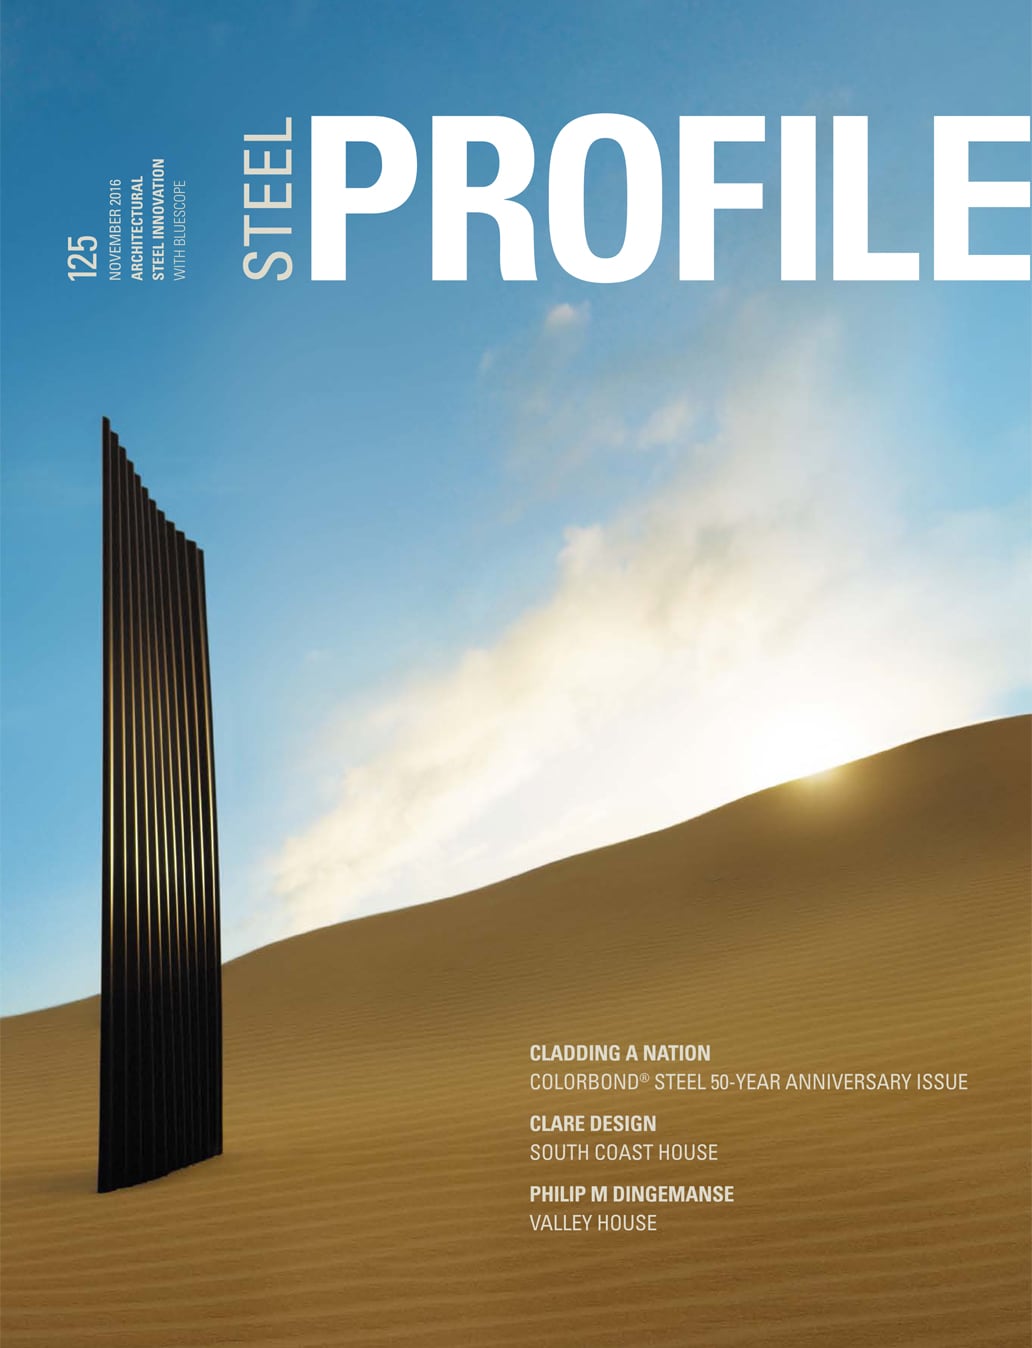 The front cover of edition 125